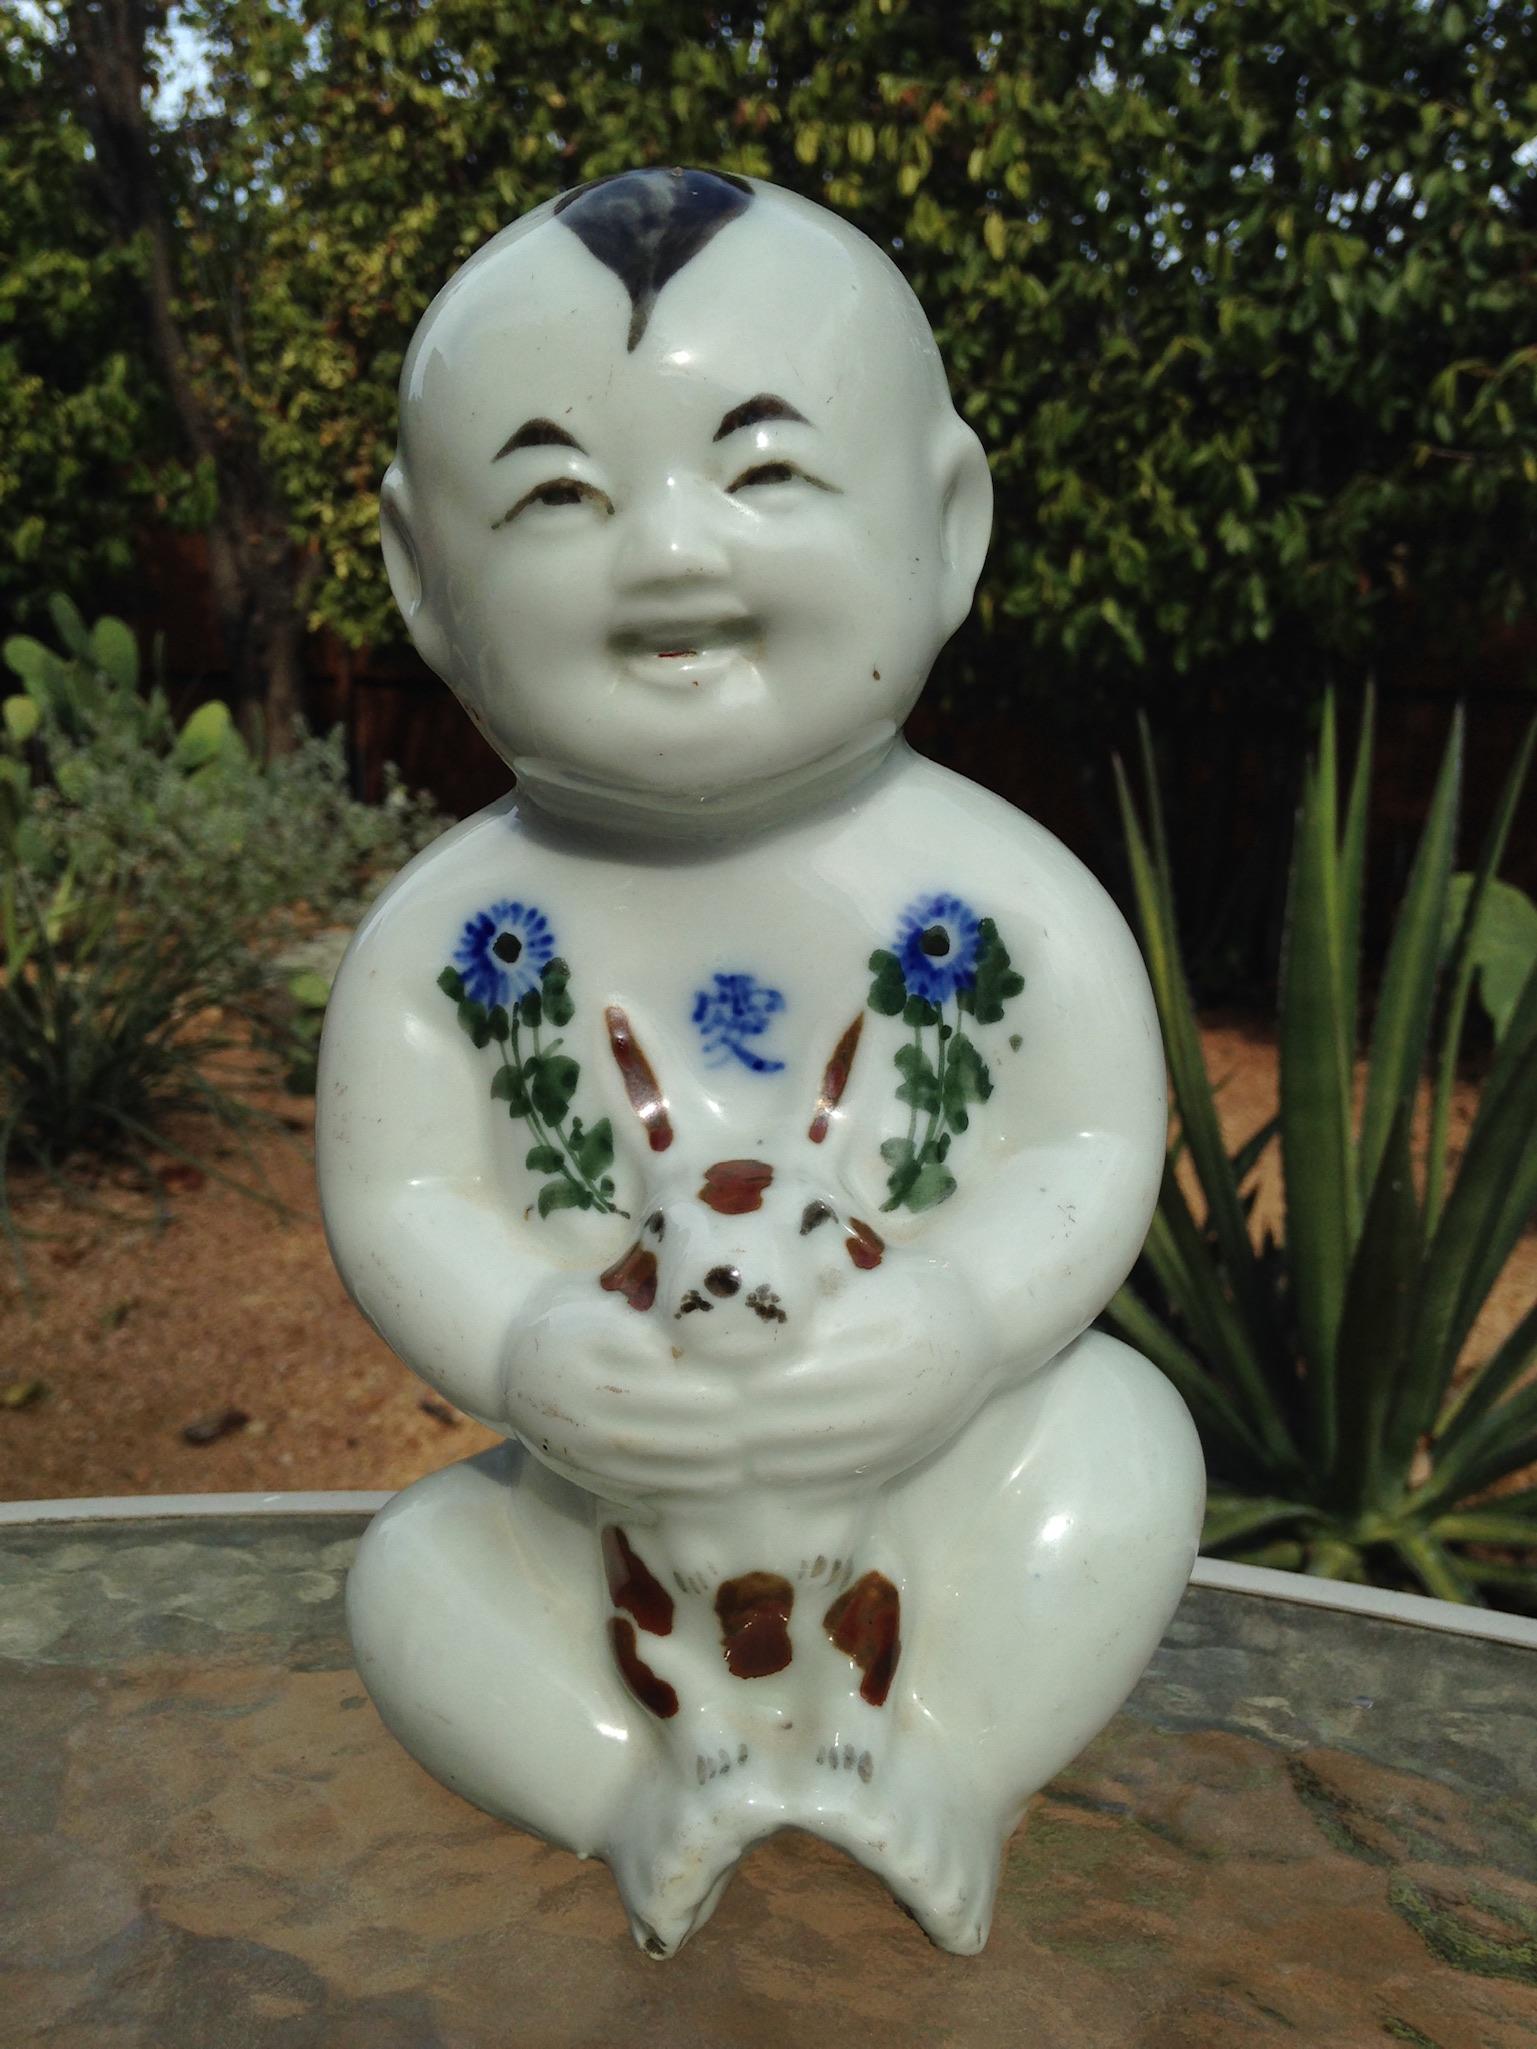 Blanc De Chine Baby Buddha with Rabbit.

19th century chinese figure statue of baby buddha smiling while carring a rabbit. Rare in that there are colors,

This was purchased in Beijing at a government antique store in 1981 and has the official